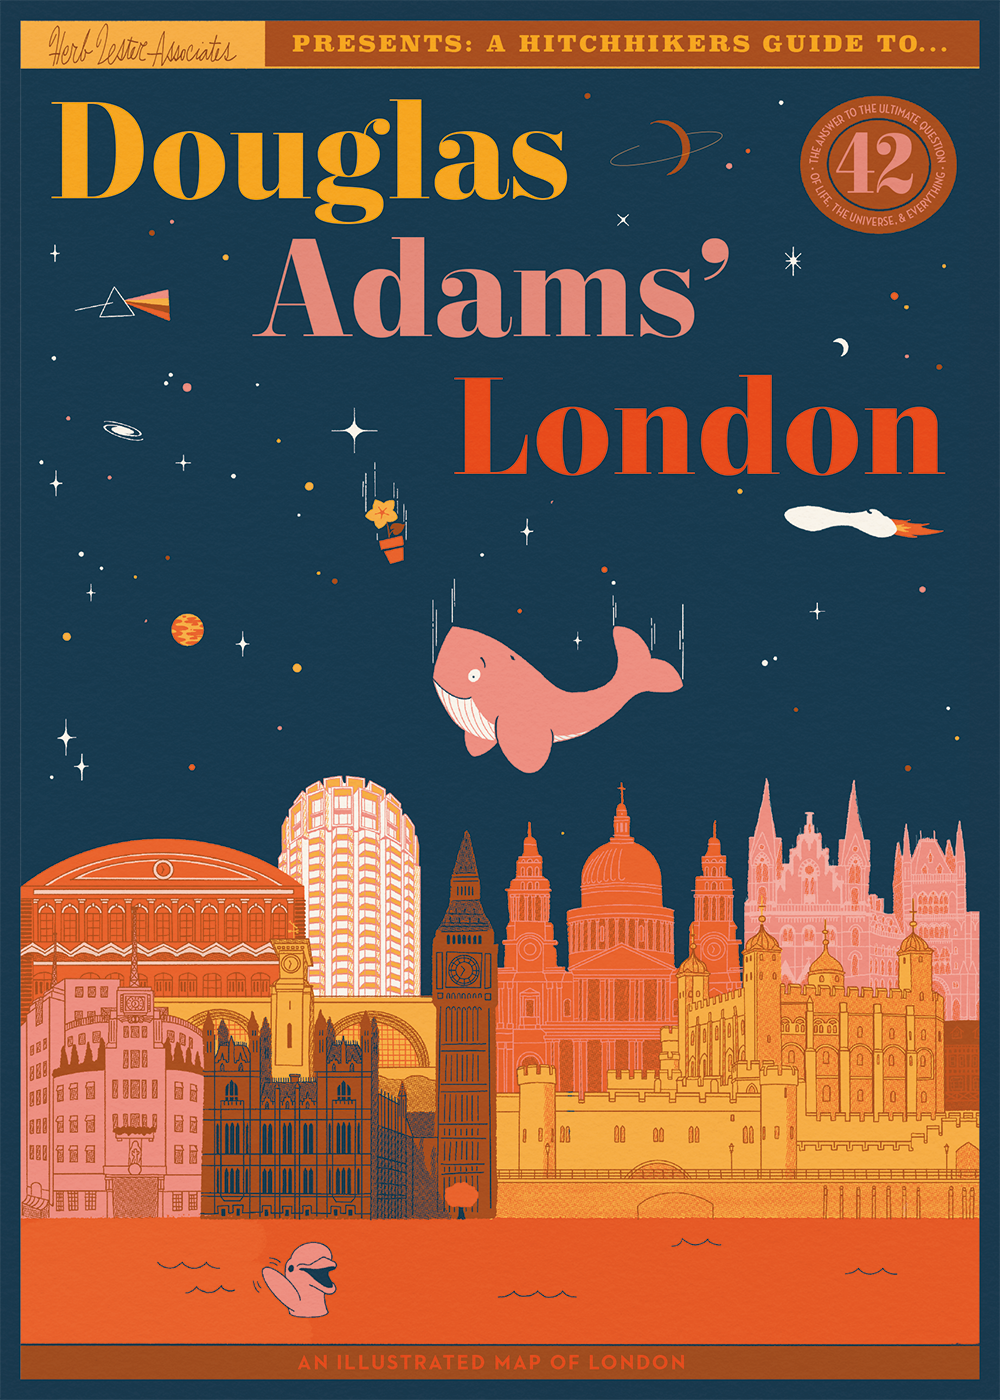 The Douglas Adams’ London Map and Guide is Available to Pre-Order from Herb Lester!